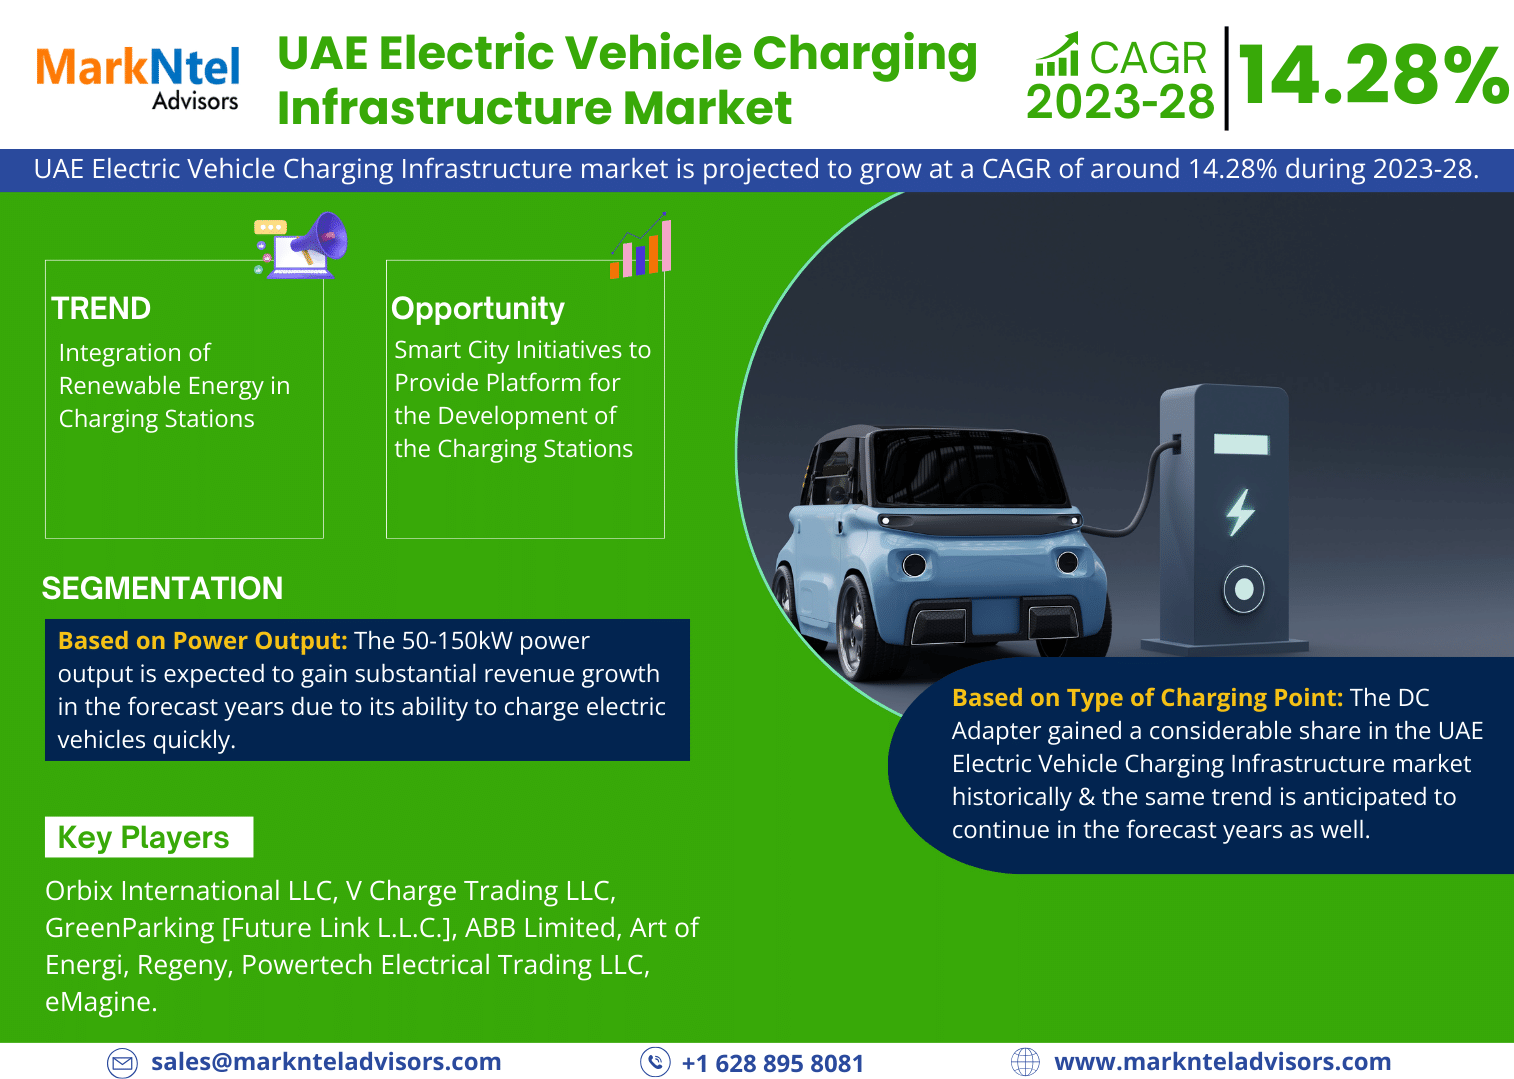 Challenges in the UAE Electric Vehicle Charging Infrastructure Market: Strategies for Sustaining 14.28% CAGR Forecast (2023-28)